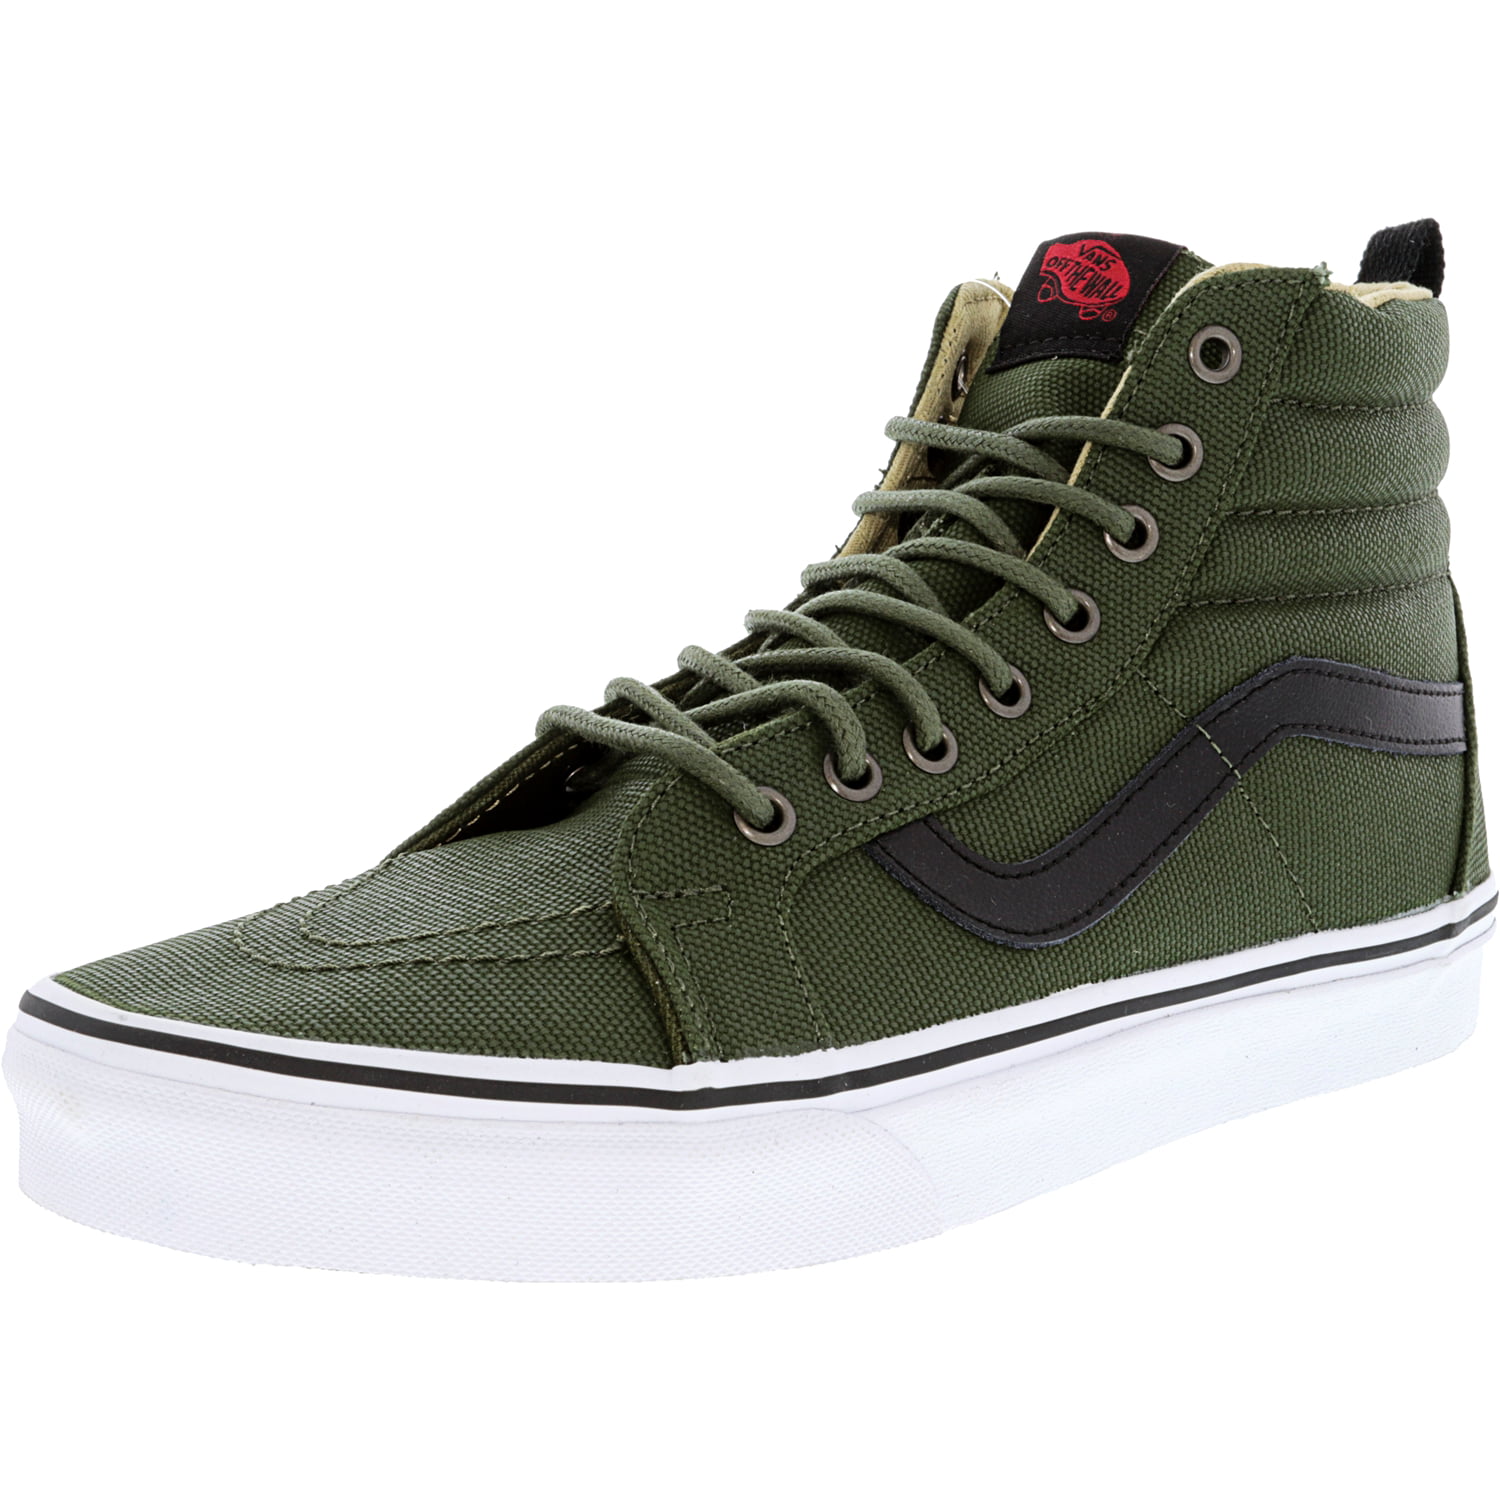 Vans Army Shoes - Army Military